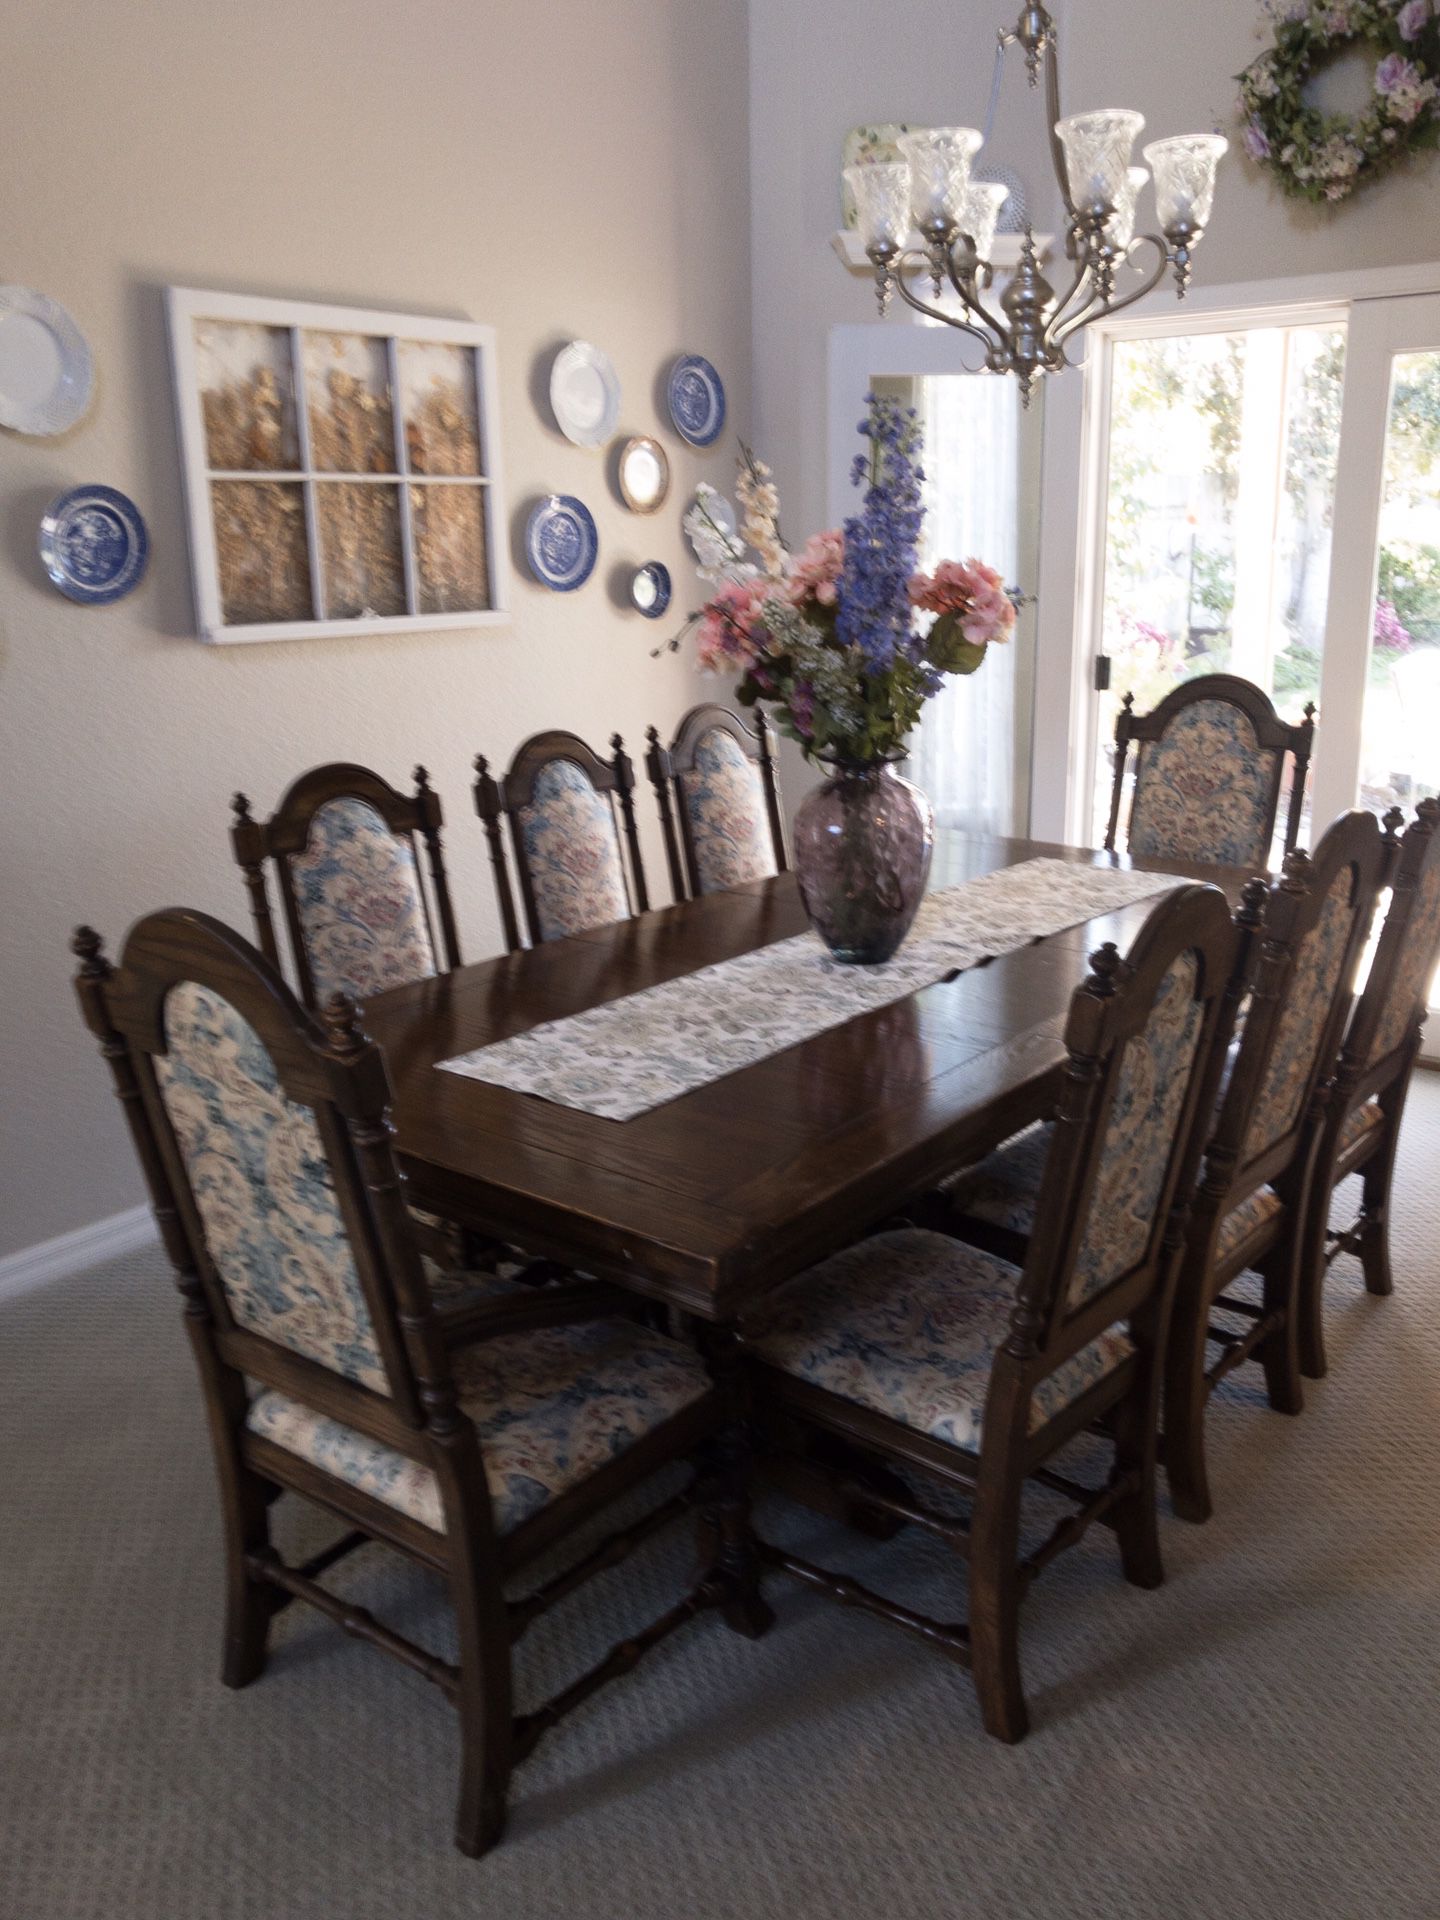 Ethan Allen Royal Charter Oak Dining Table with upholstered chairs